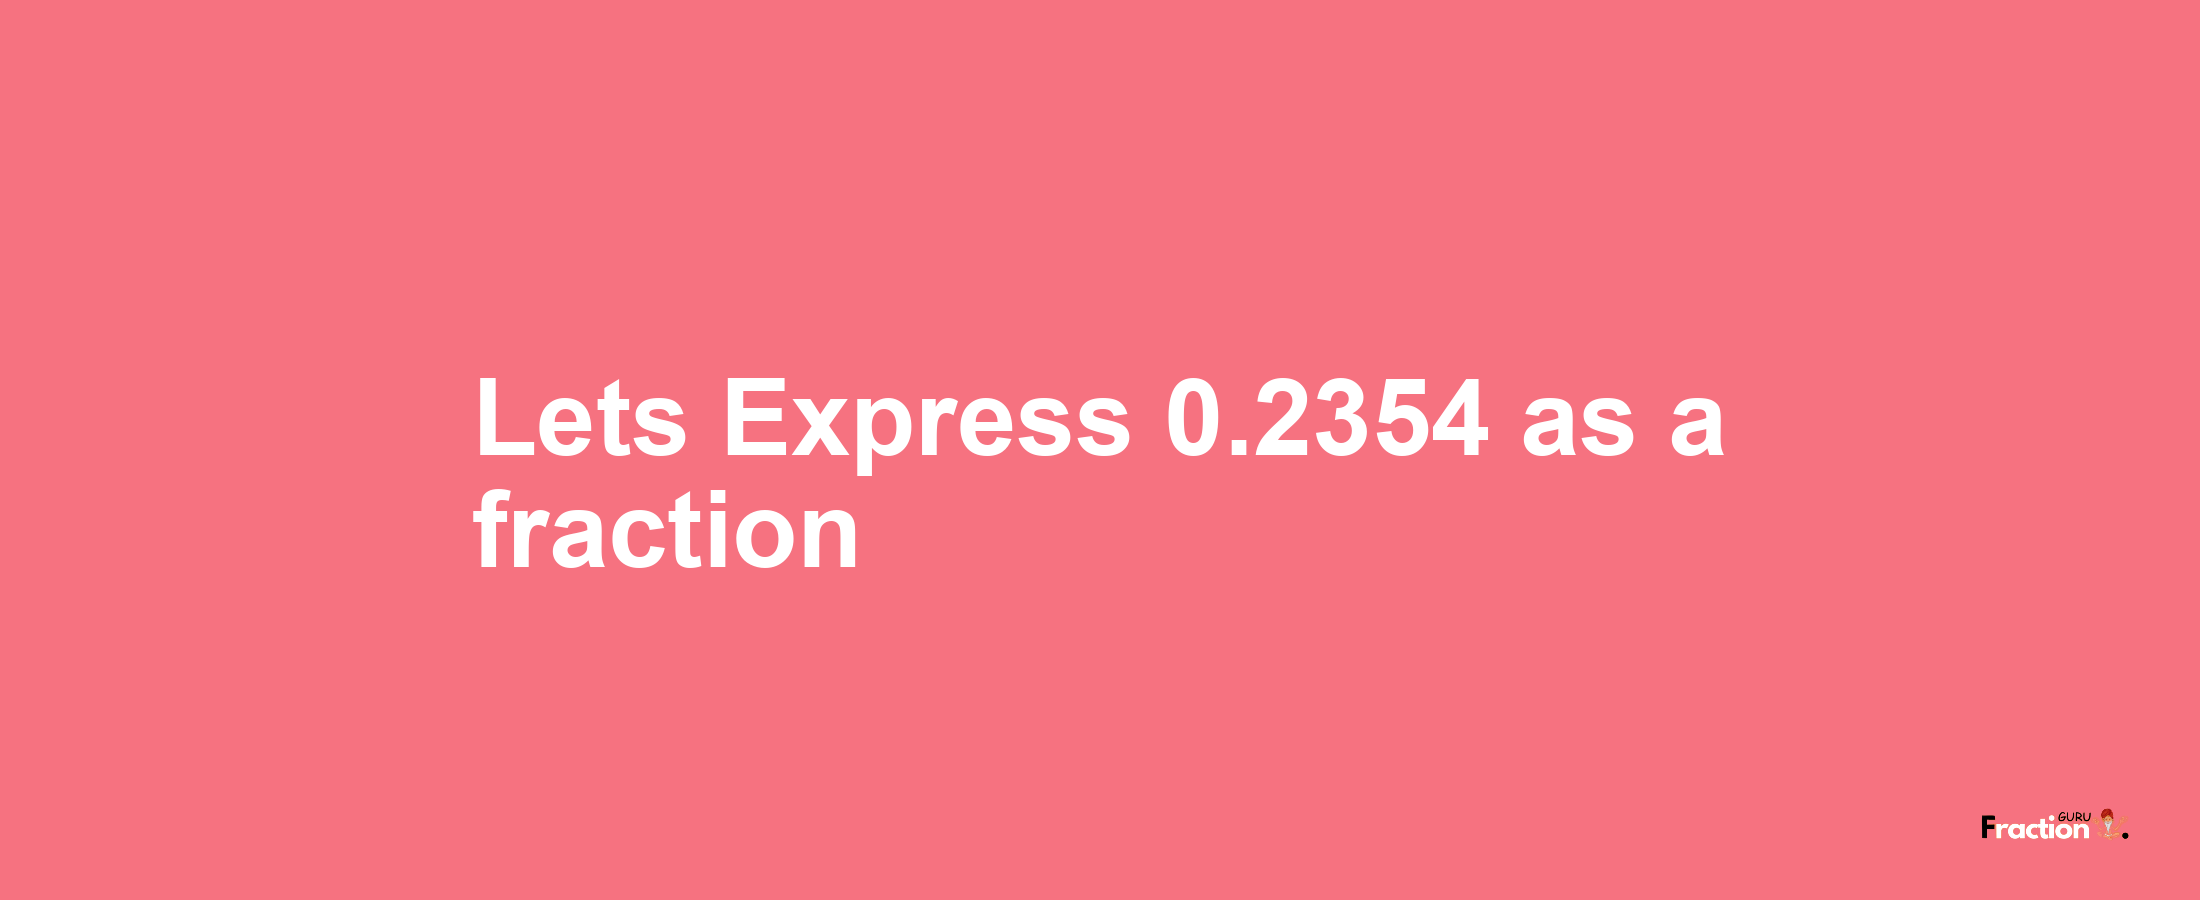 Lets Express 0.2354 as afraction